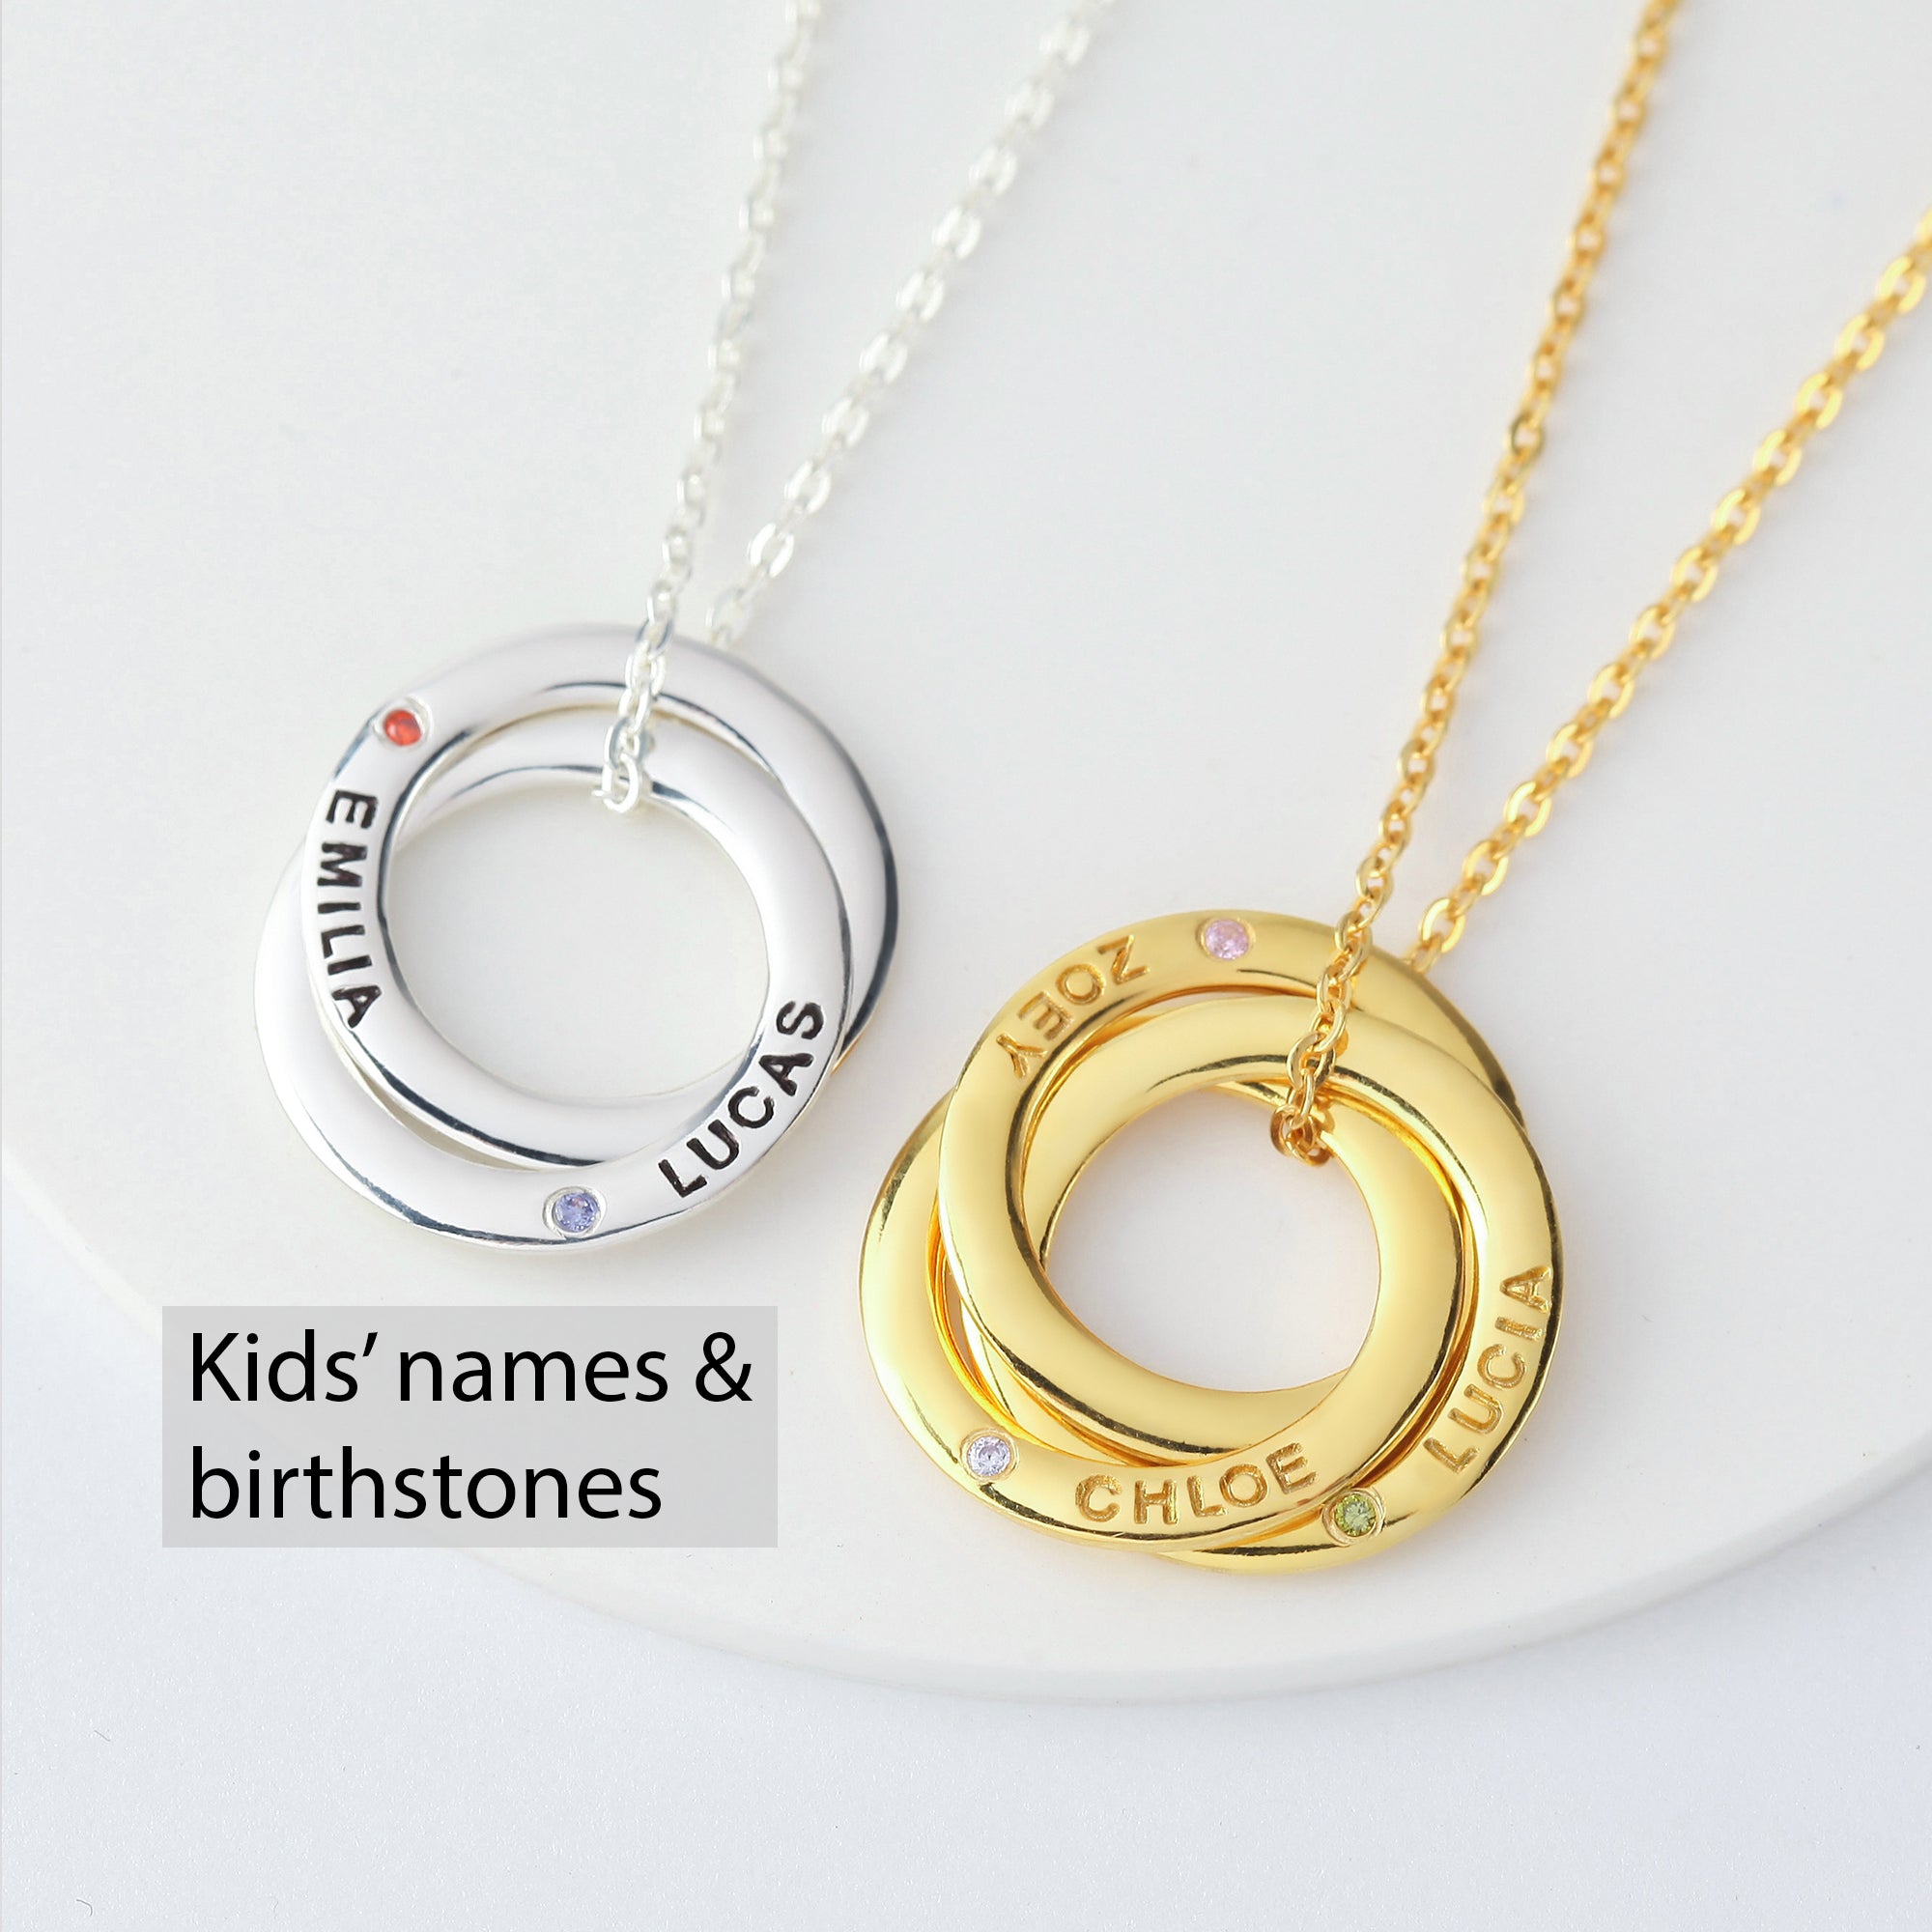 Personalized Mother Birthstone Necklace - 925 Sterling Silver & 18K Gold Plated, Family Names & Birthstones, Gift for Mom - Necklaces - Bijou Her -  -  - 